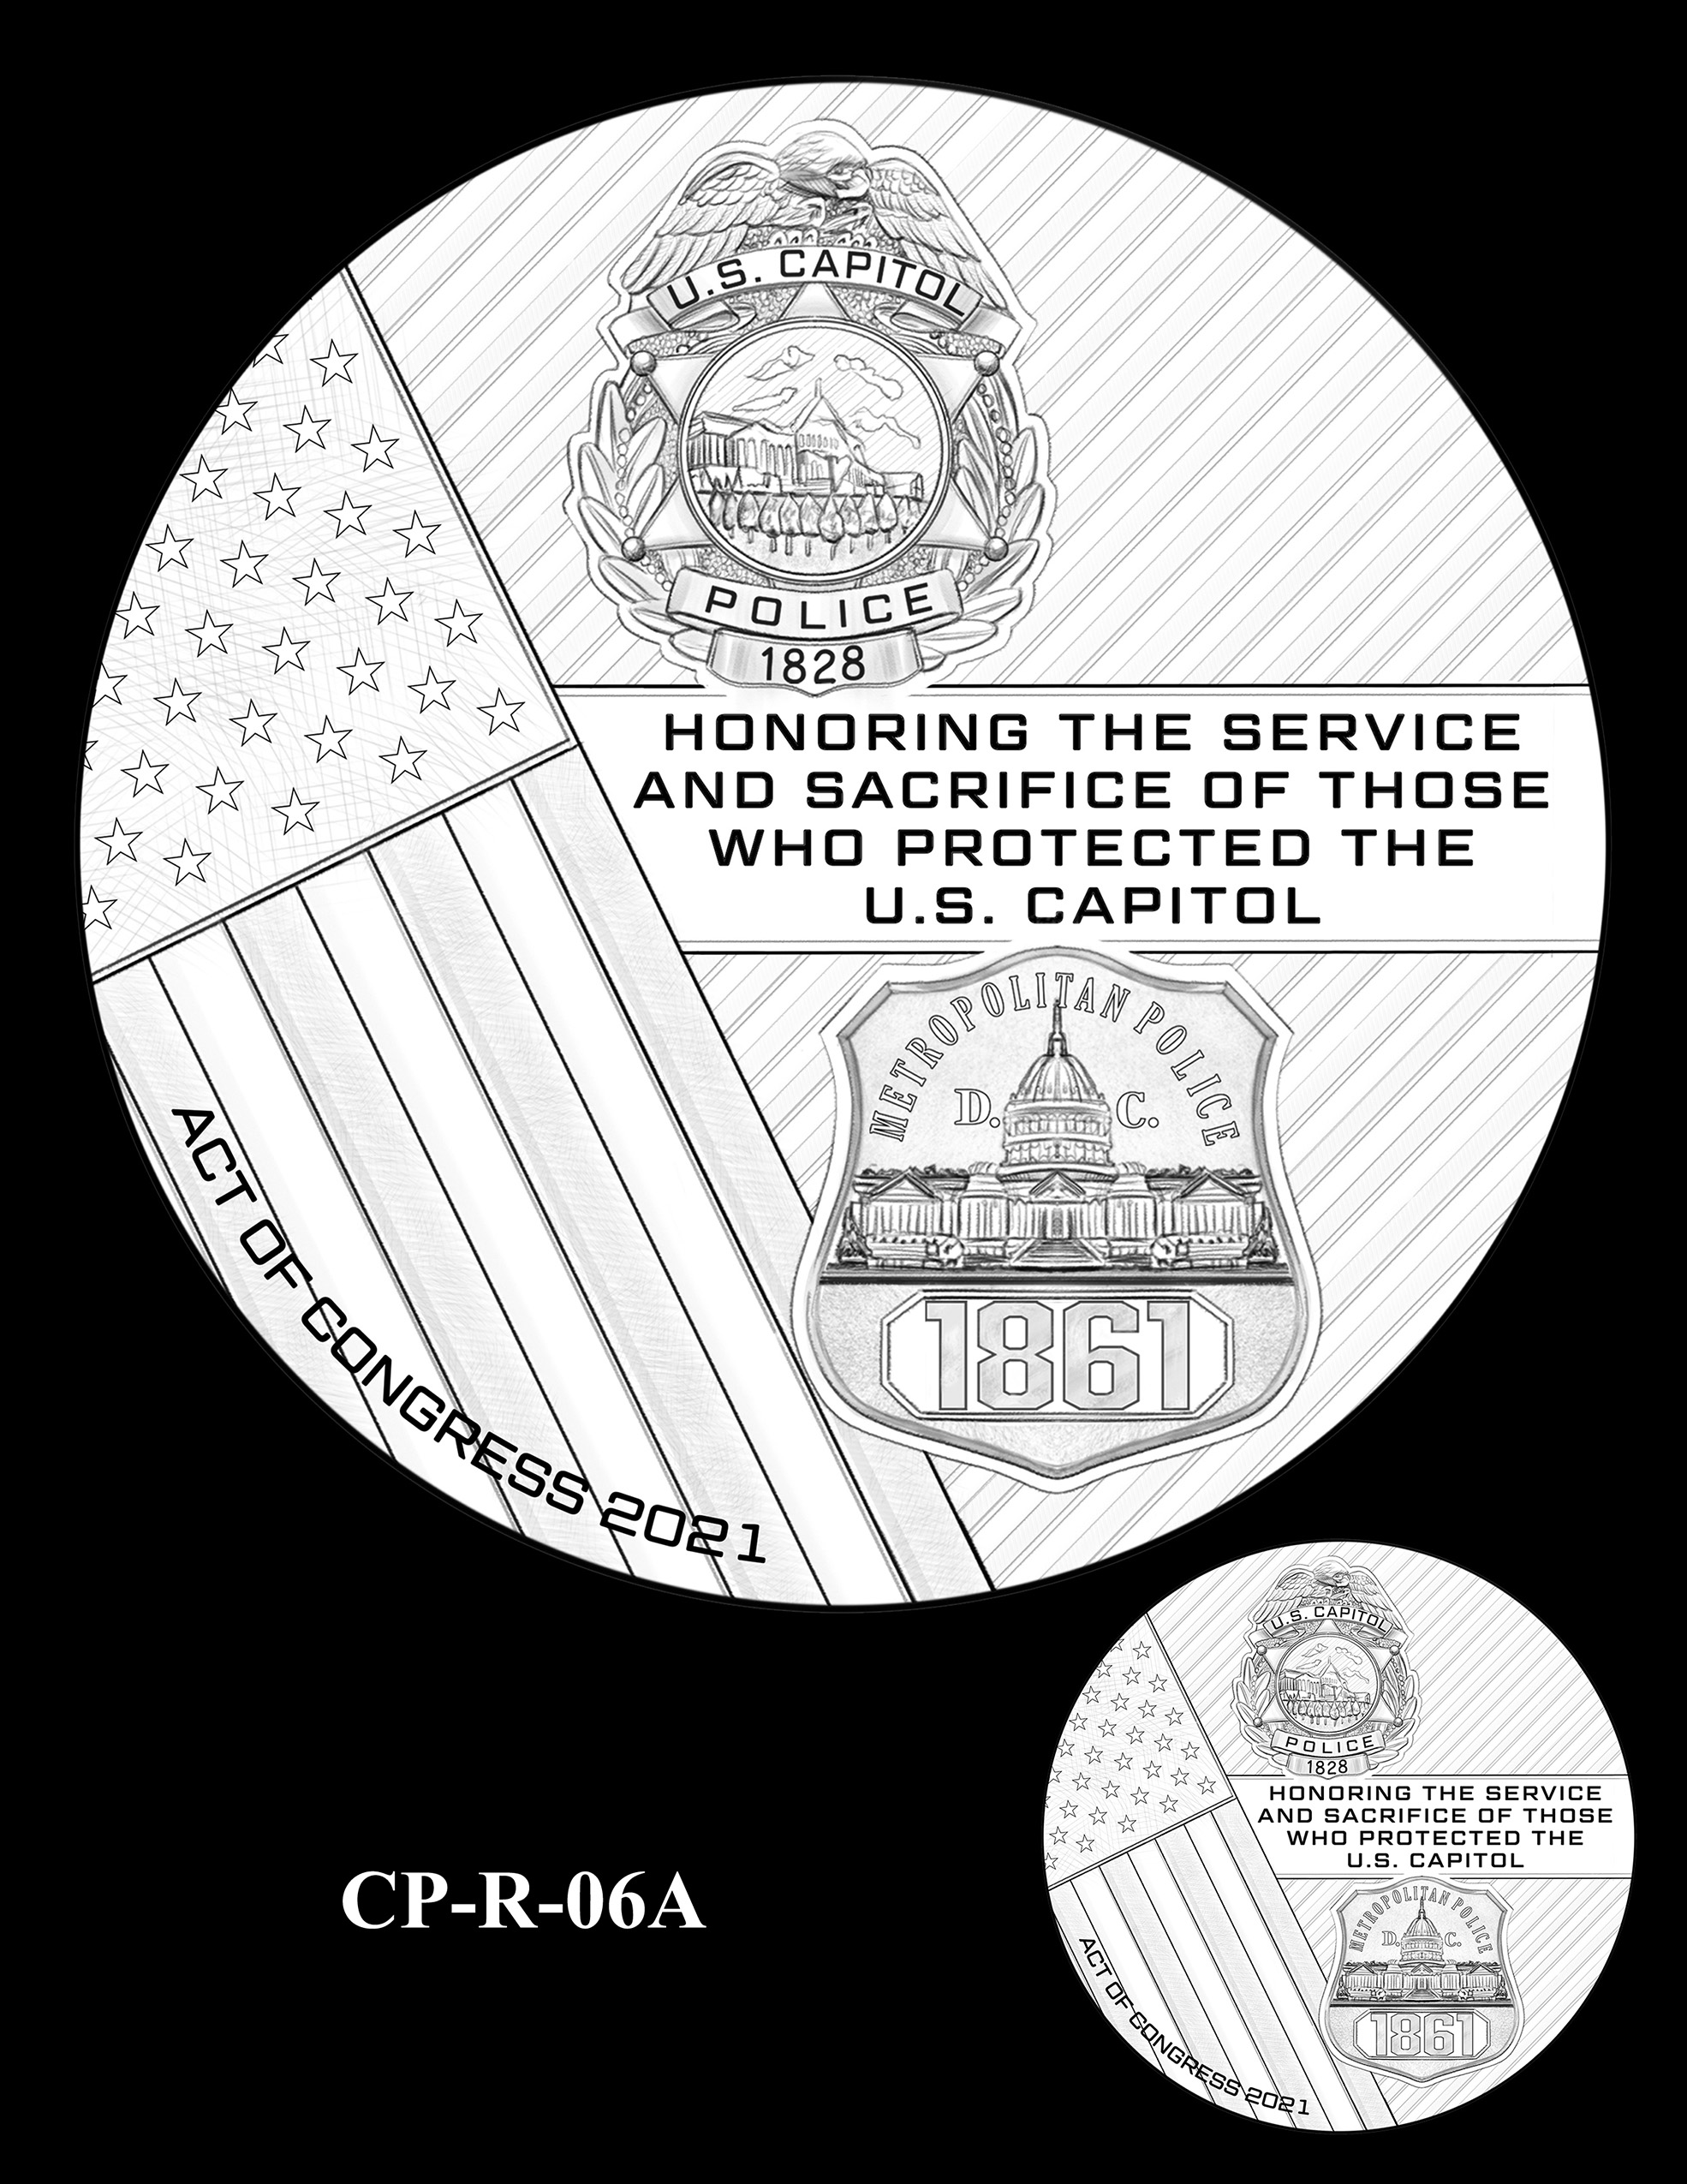 CP-R-06A -- Congressional Gold Medal for Those Who Protected the U.S. Capitol on January 6th 2021